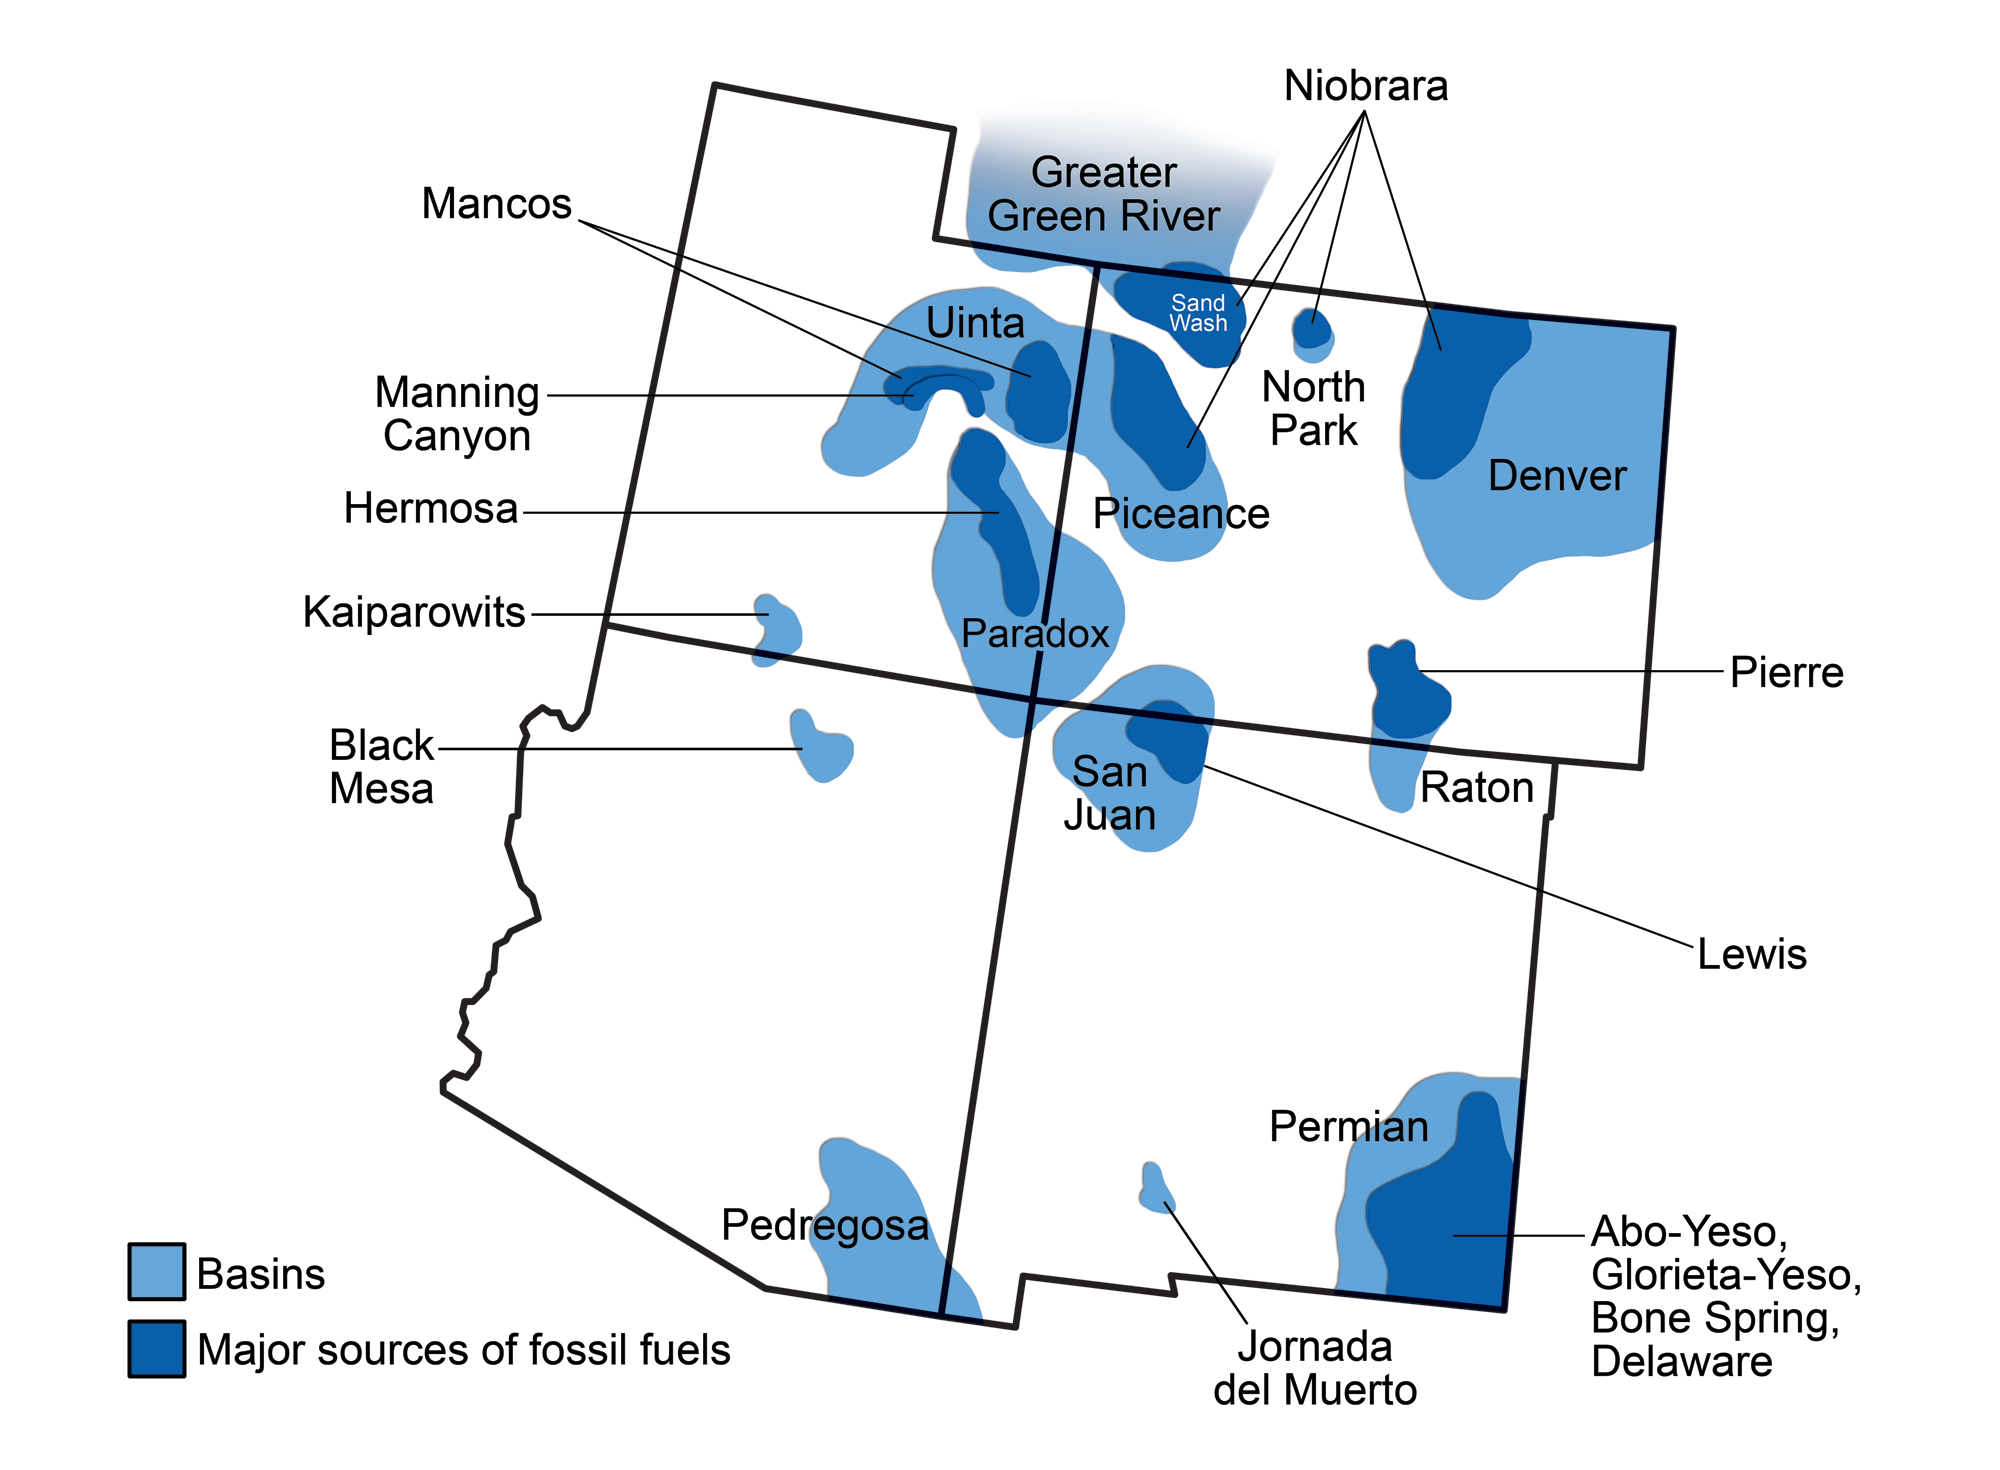 Map showing the four southwestern states (Arizona, Colorado, New Mexico, and Utah) with sedimentary basin shaded in light blue. Dark blue areas in the basin show extent of oil-and-gas producing formations. Major basins are the Denver (northeastern Colorado), Uinta-Piceance (northeastern Utah and northwestern Colorado), Paradox (southern Utah and Colorado), San Juan and Raton (southern Colorado and northern New Mexico), Permian (southeastern New Mexico), and Pedregosa (southeastern Arizona and southwestern New Mexico).